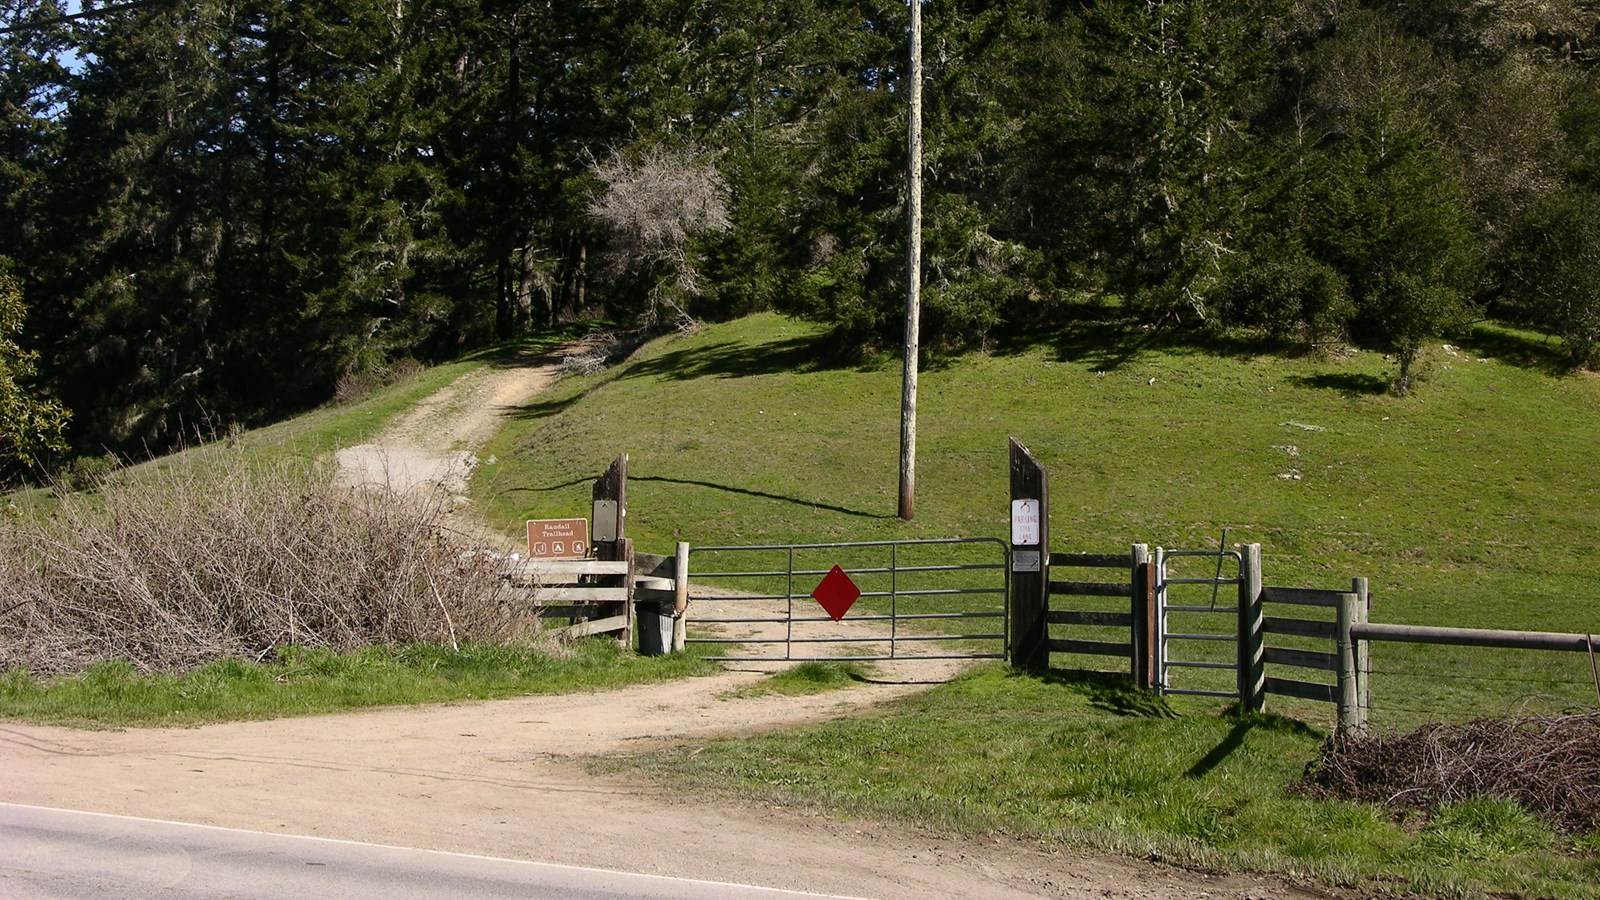 A wide trail passes through a gate and cattle pasture before heading up a forested hill.